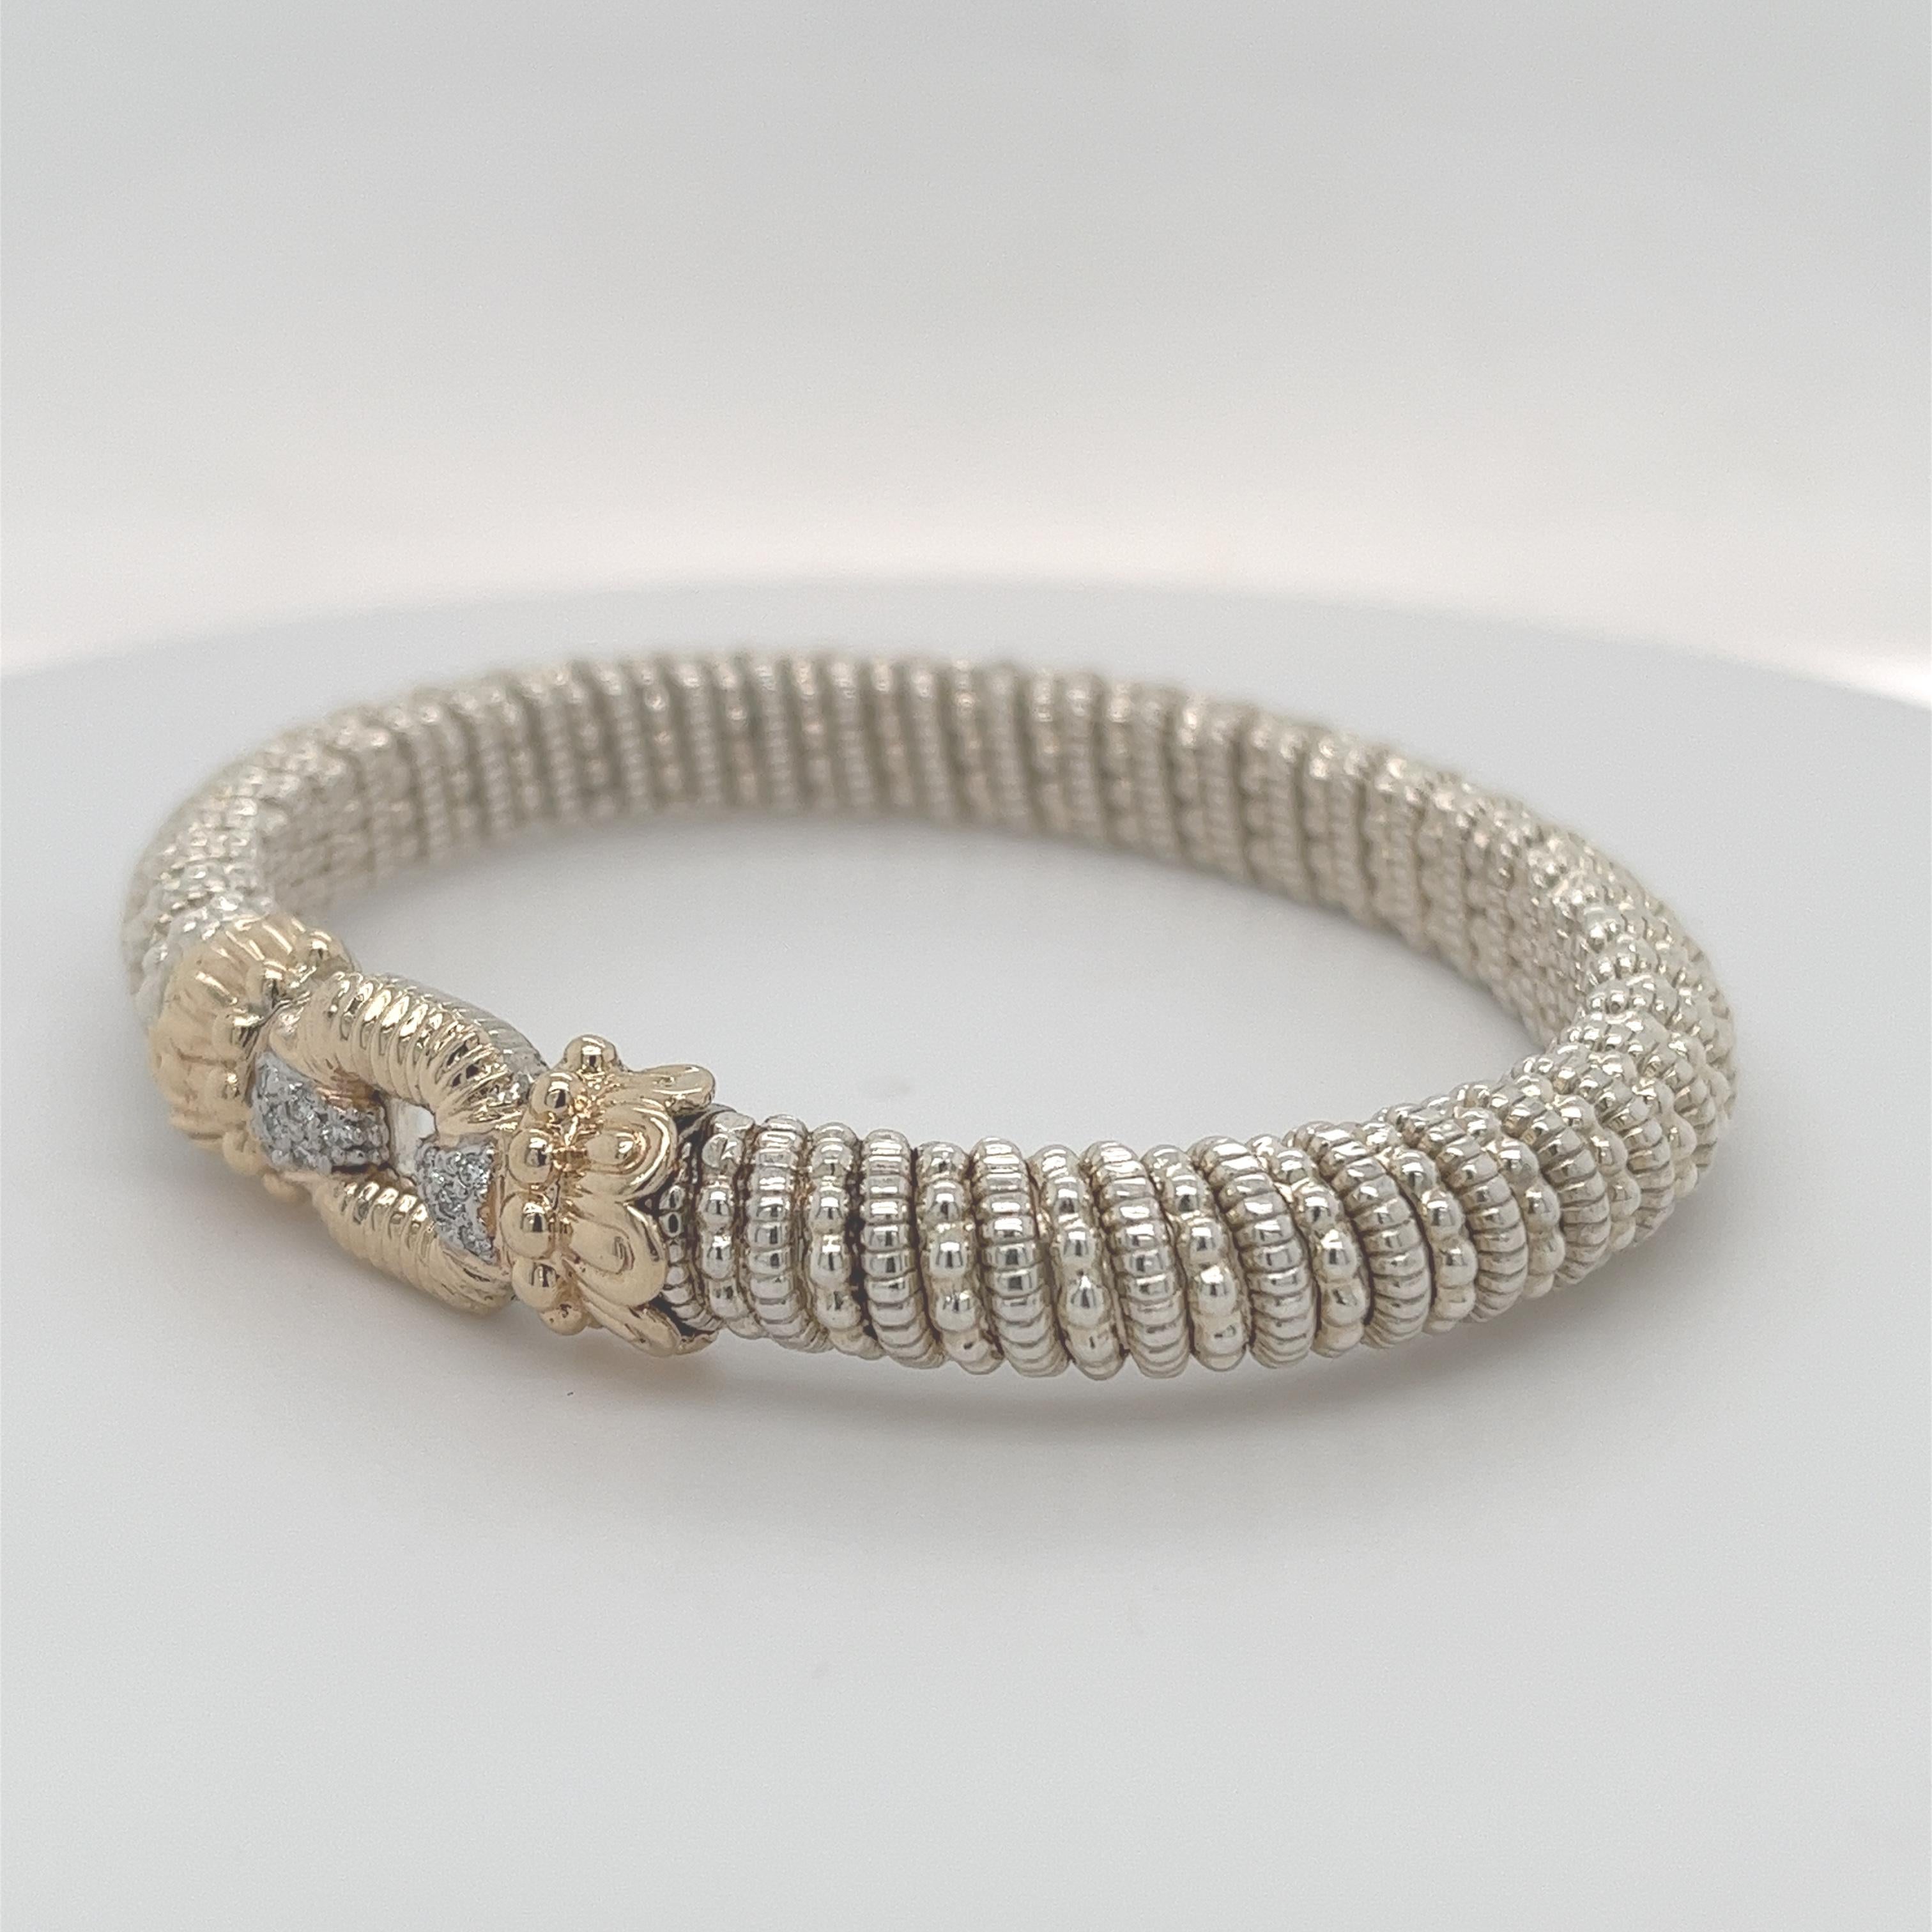 Vahan Hidden Clasp Bangle with Diamonds in 14K Yellow Gold and Silver In New Condition For Sale In Lumberton, TX